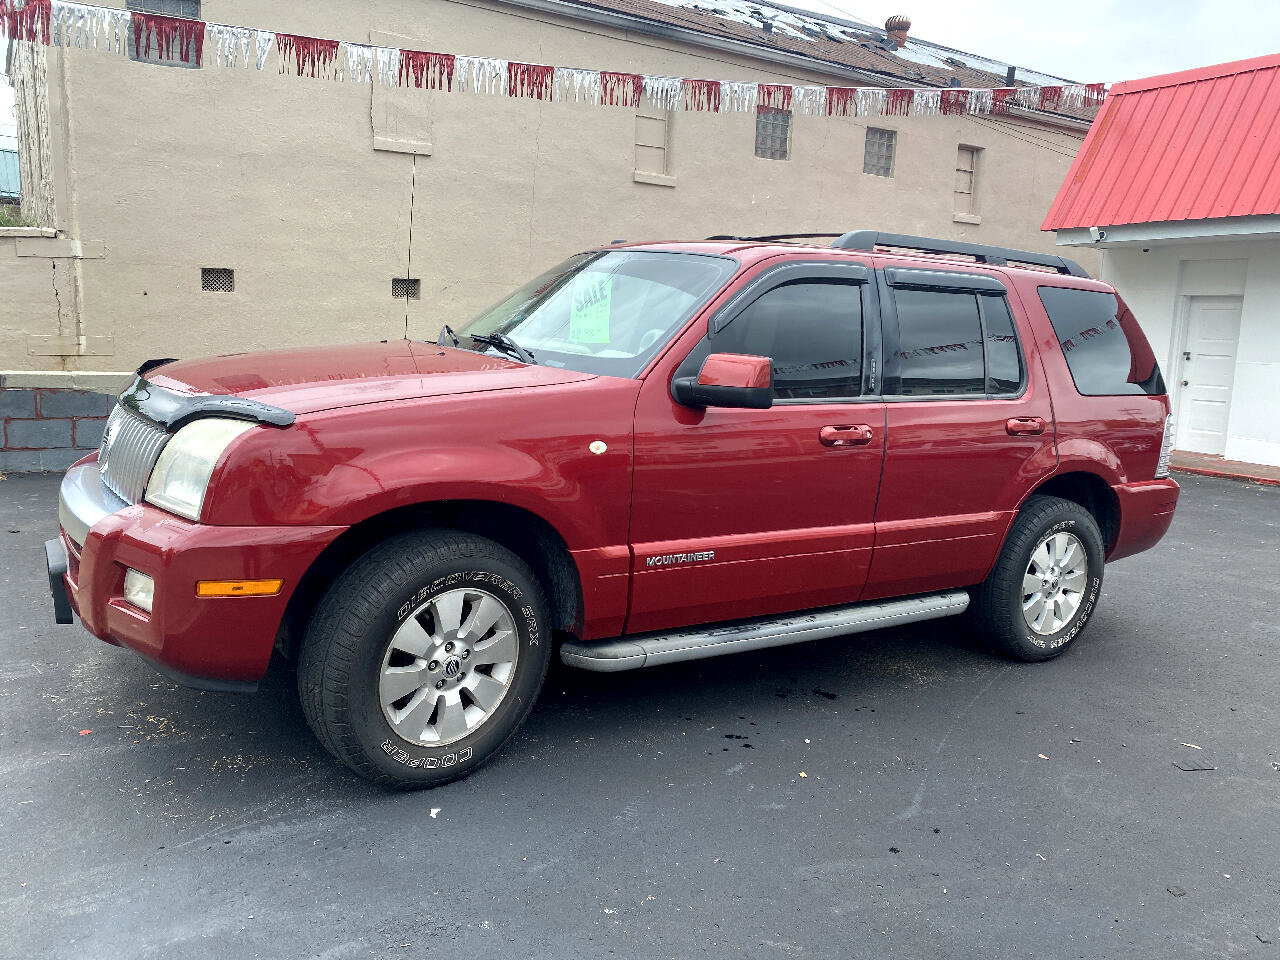 Used 2010 Mercury Mountaineer for Sale Right Now - Autotrader